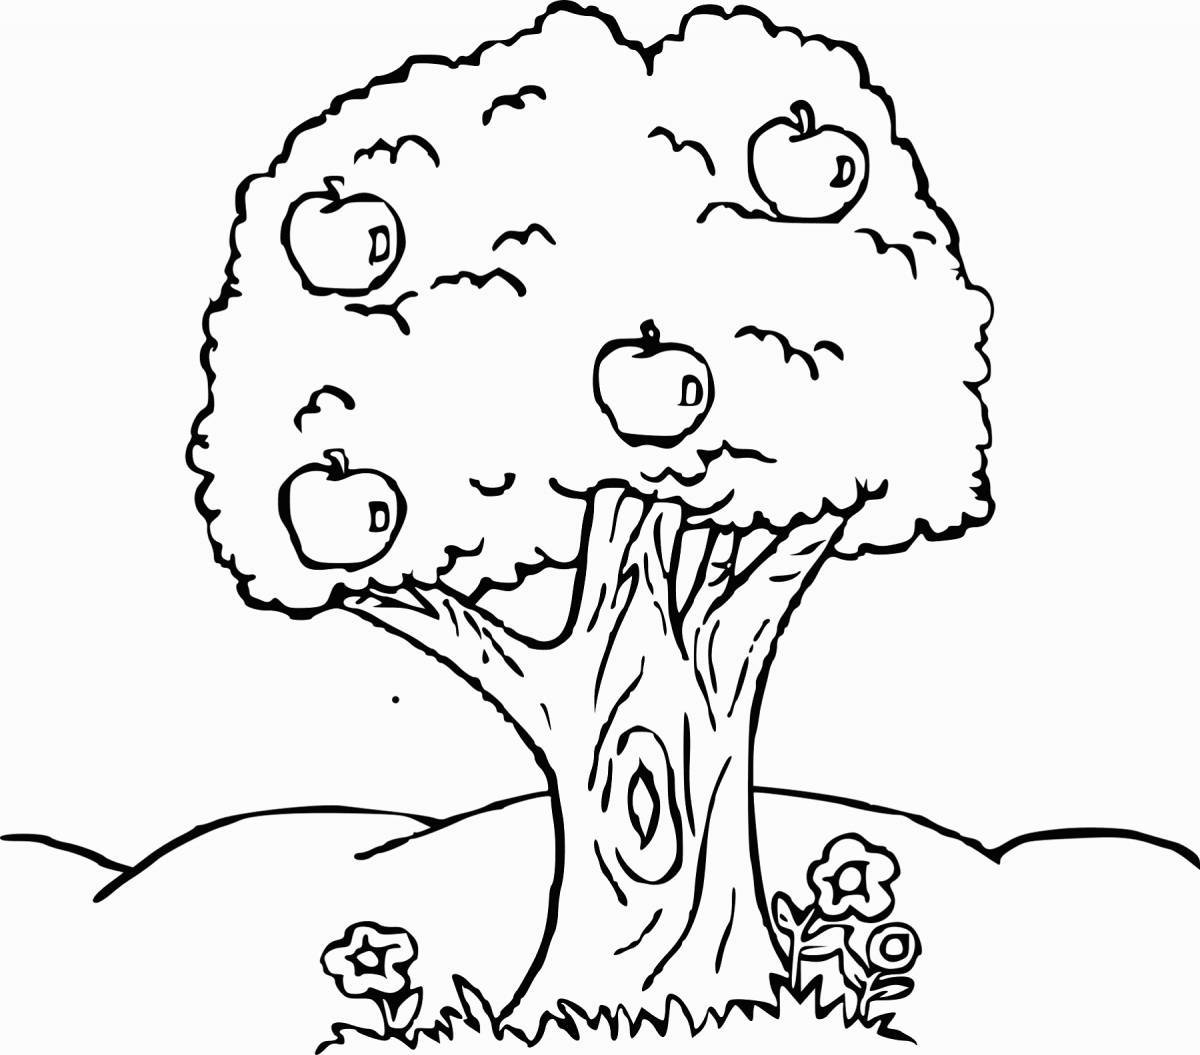 Sweet tree coloring book for kids